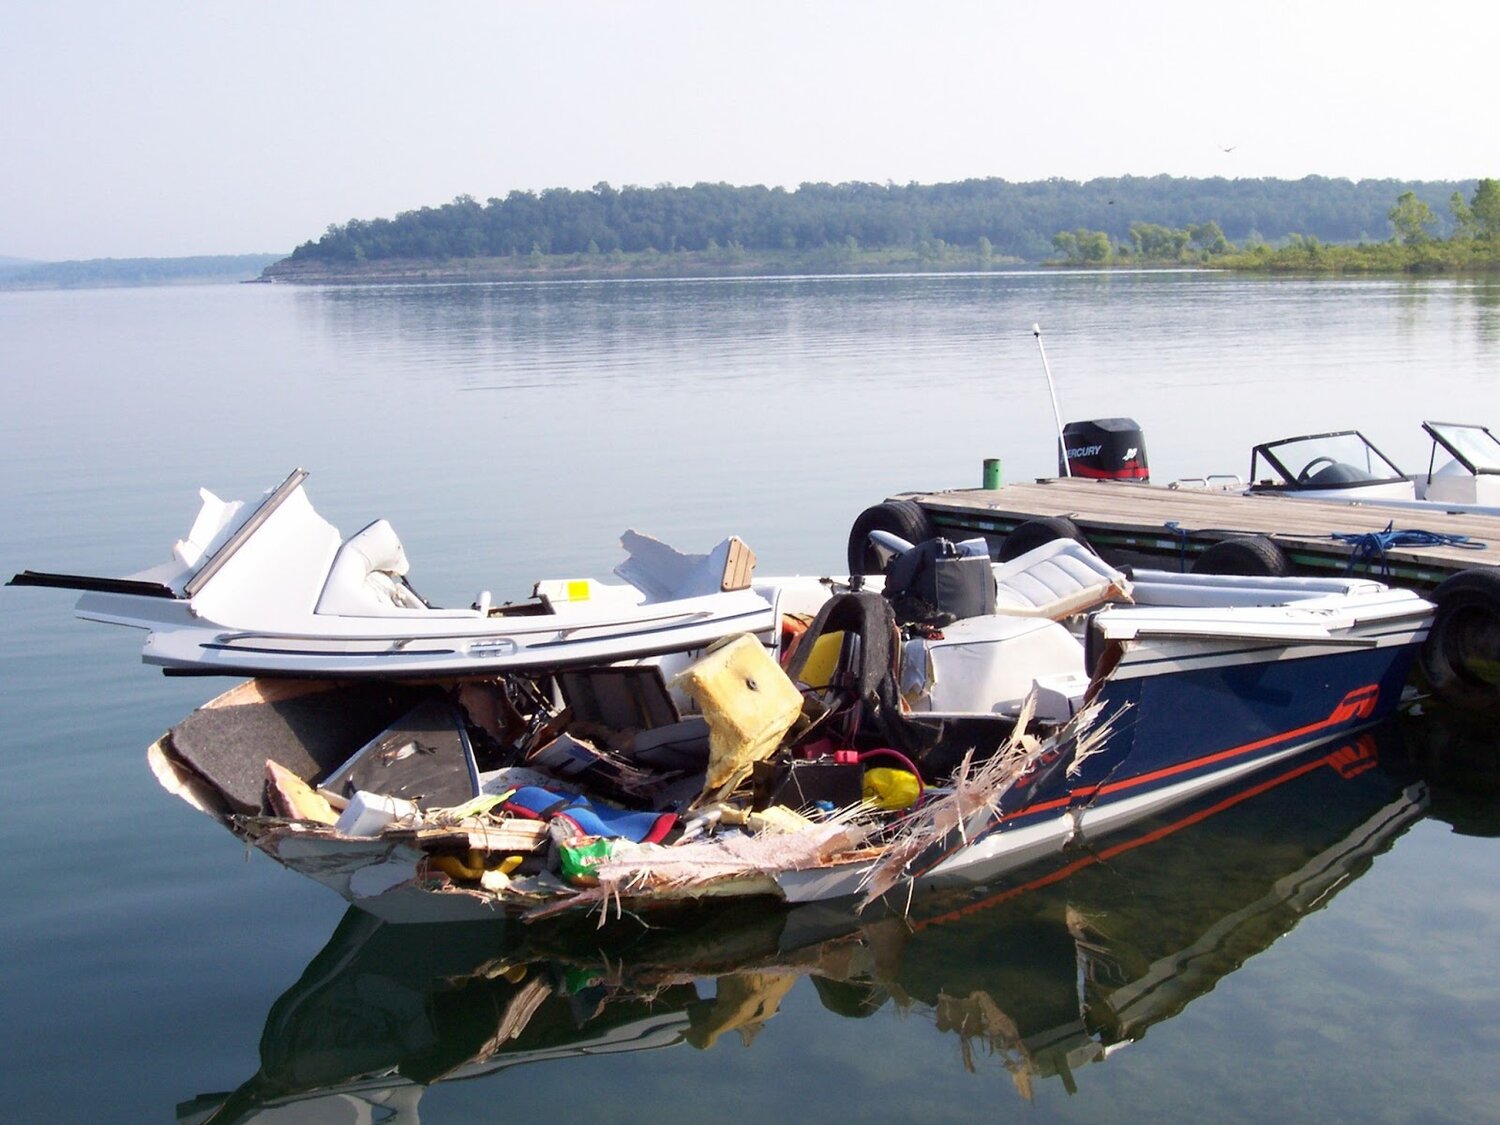 Operator inattention was the leading cause of boating accidents in 2023, according to the recently released AGFC 2023 Boating Accident Year-End Report.